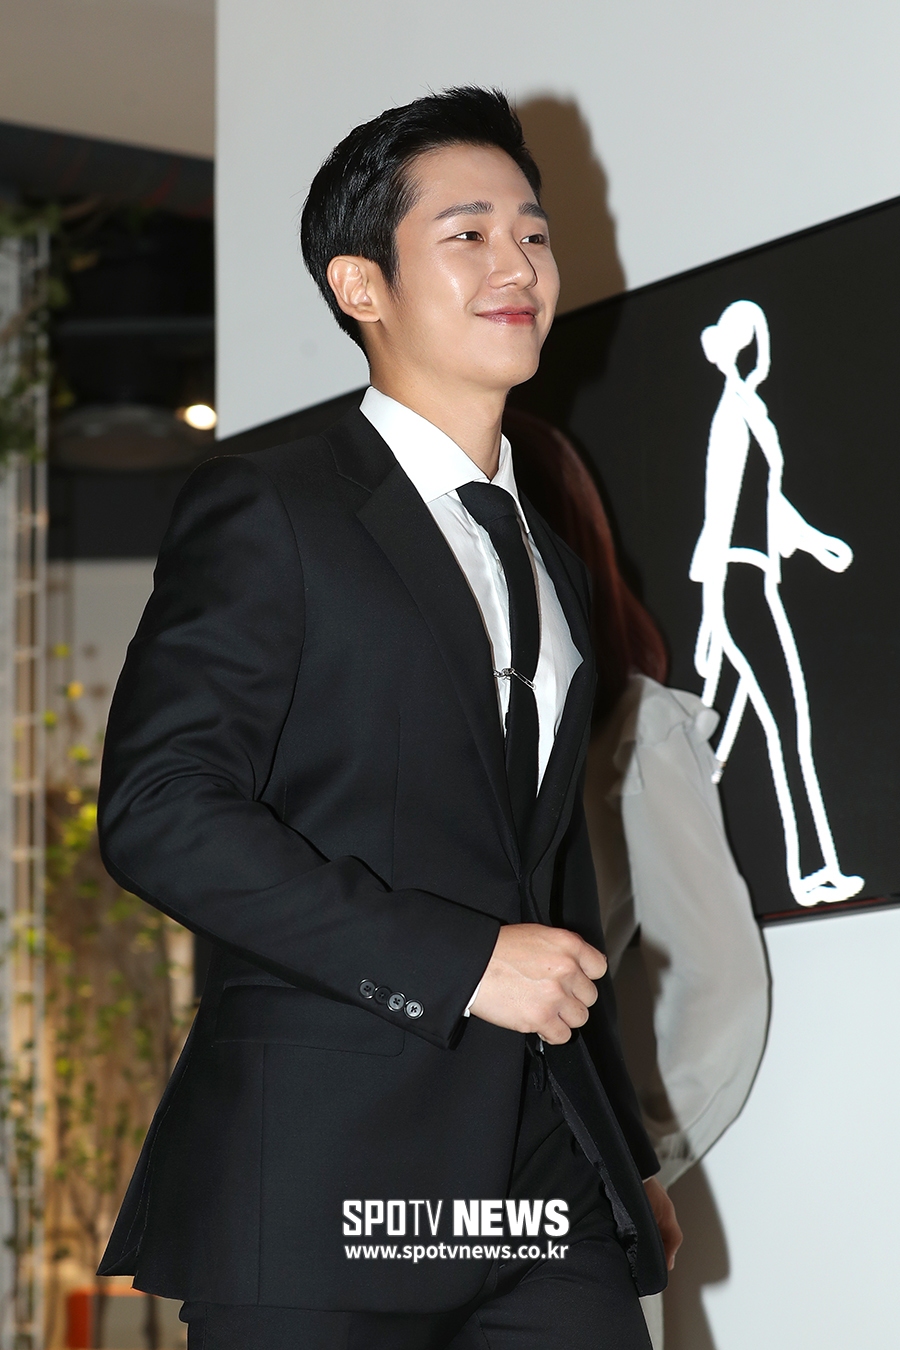 Actor Jung Hae In is leaving after attending the Grand Open Event at the Trade Center store in Hydei duty free deft.